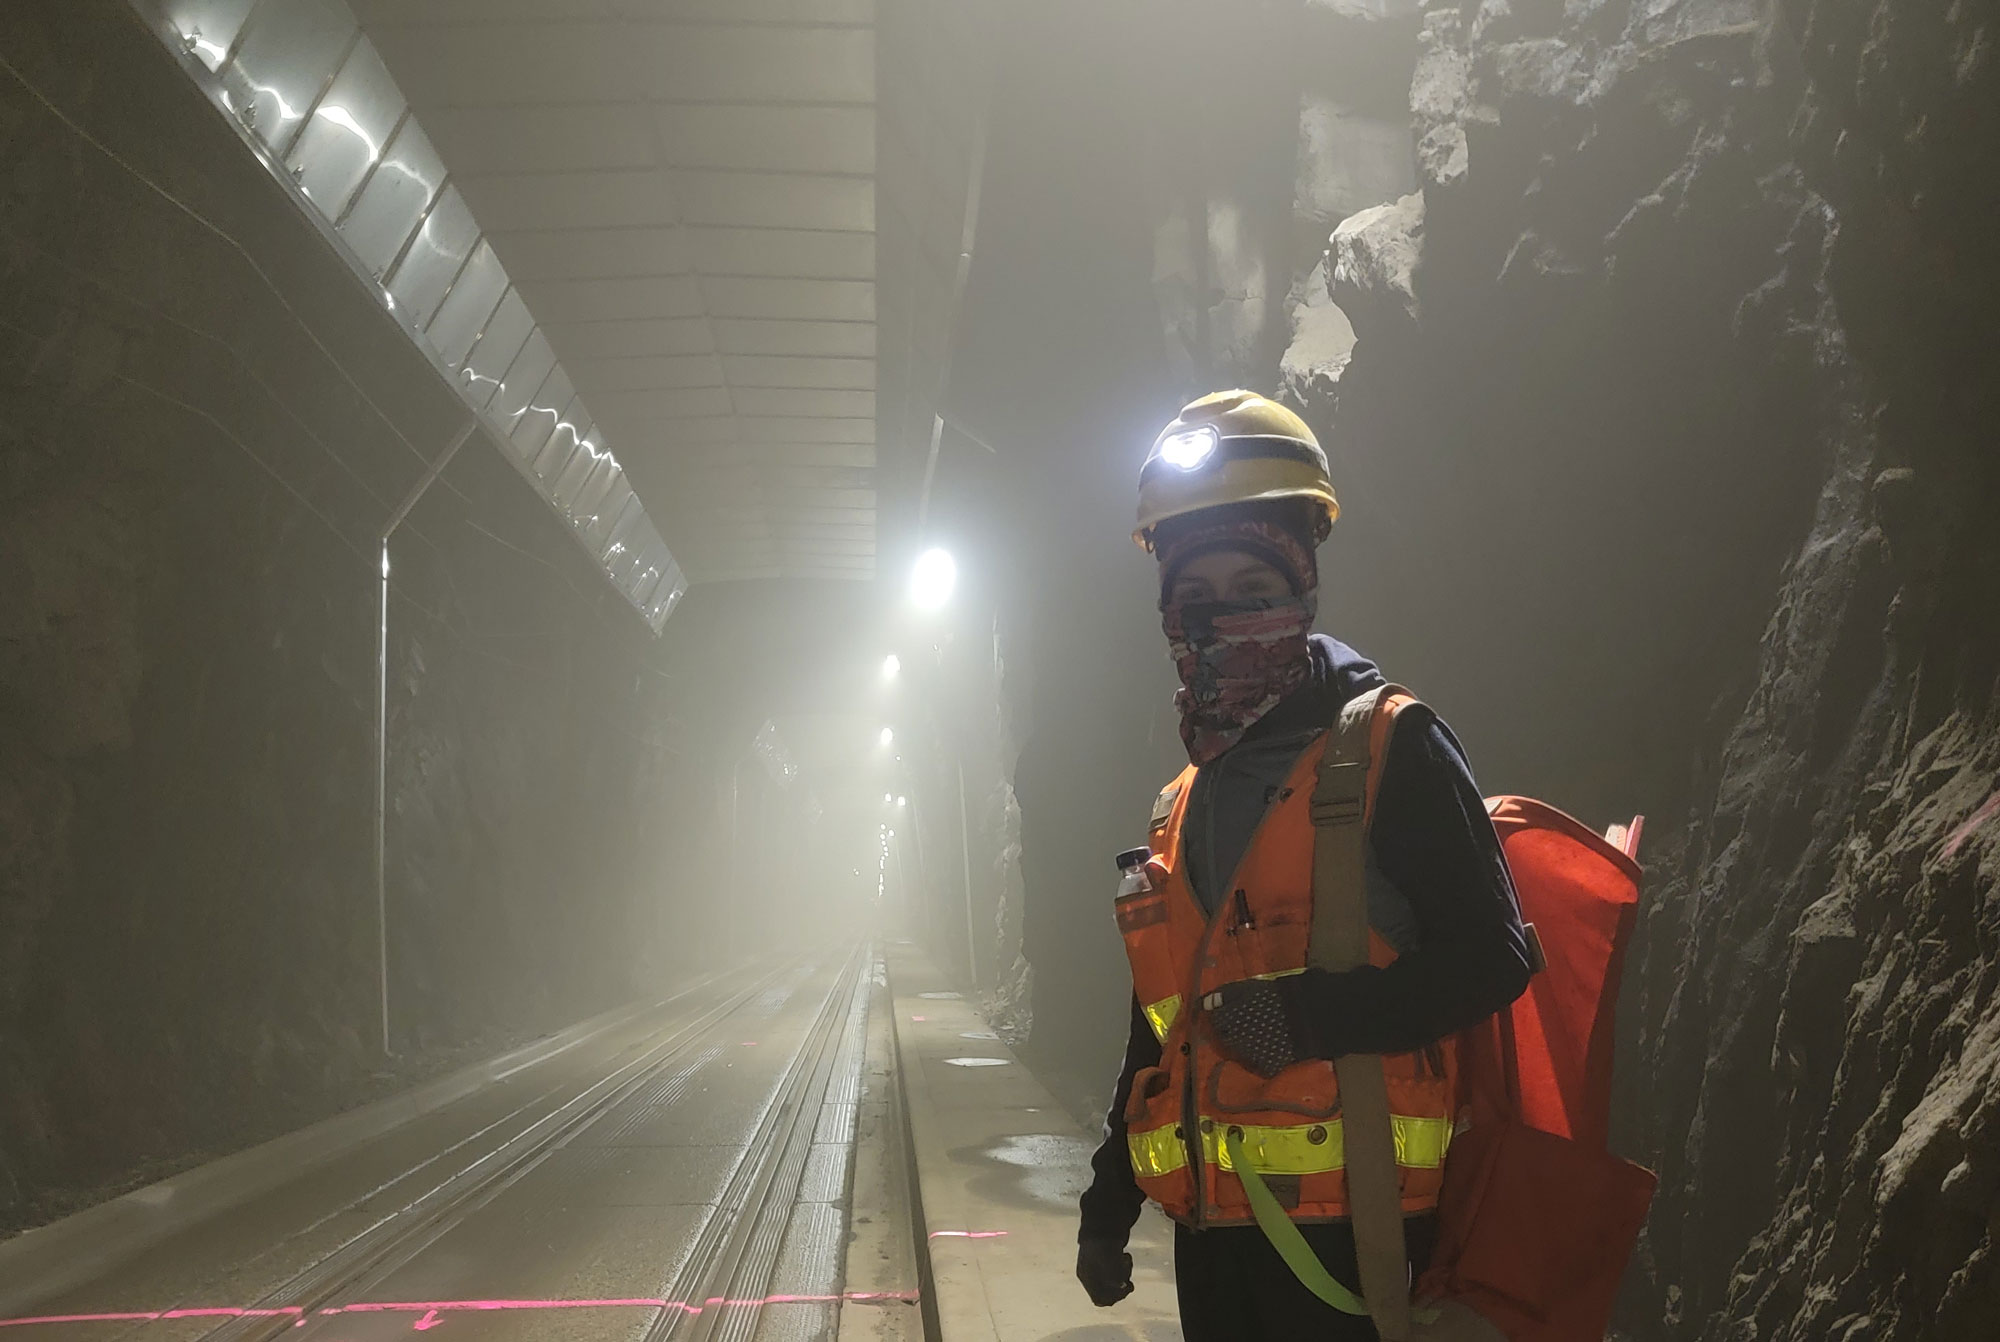 Faren Crow, an ACS crewmember, locates survey control points in the Whittier Tunnel